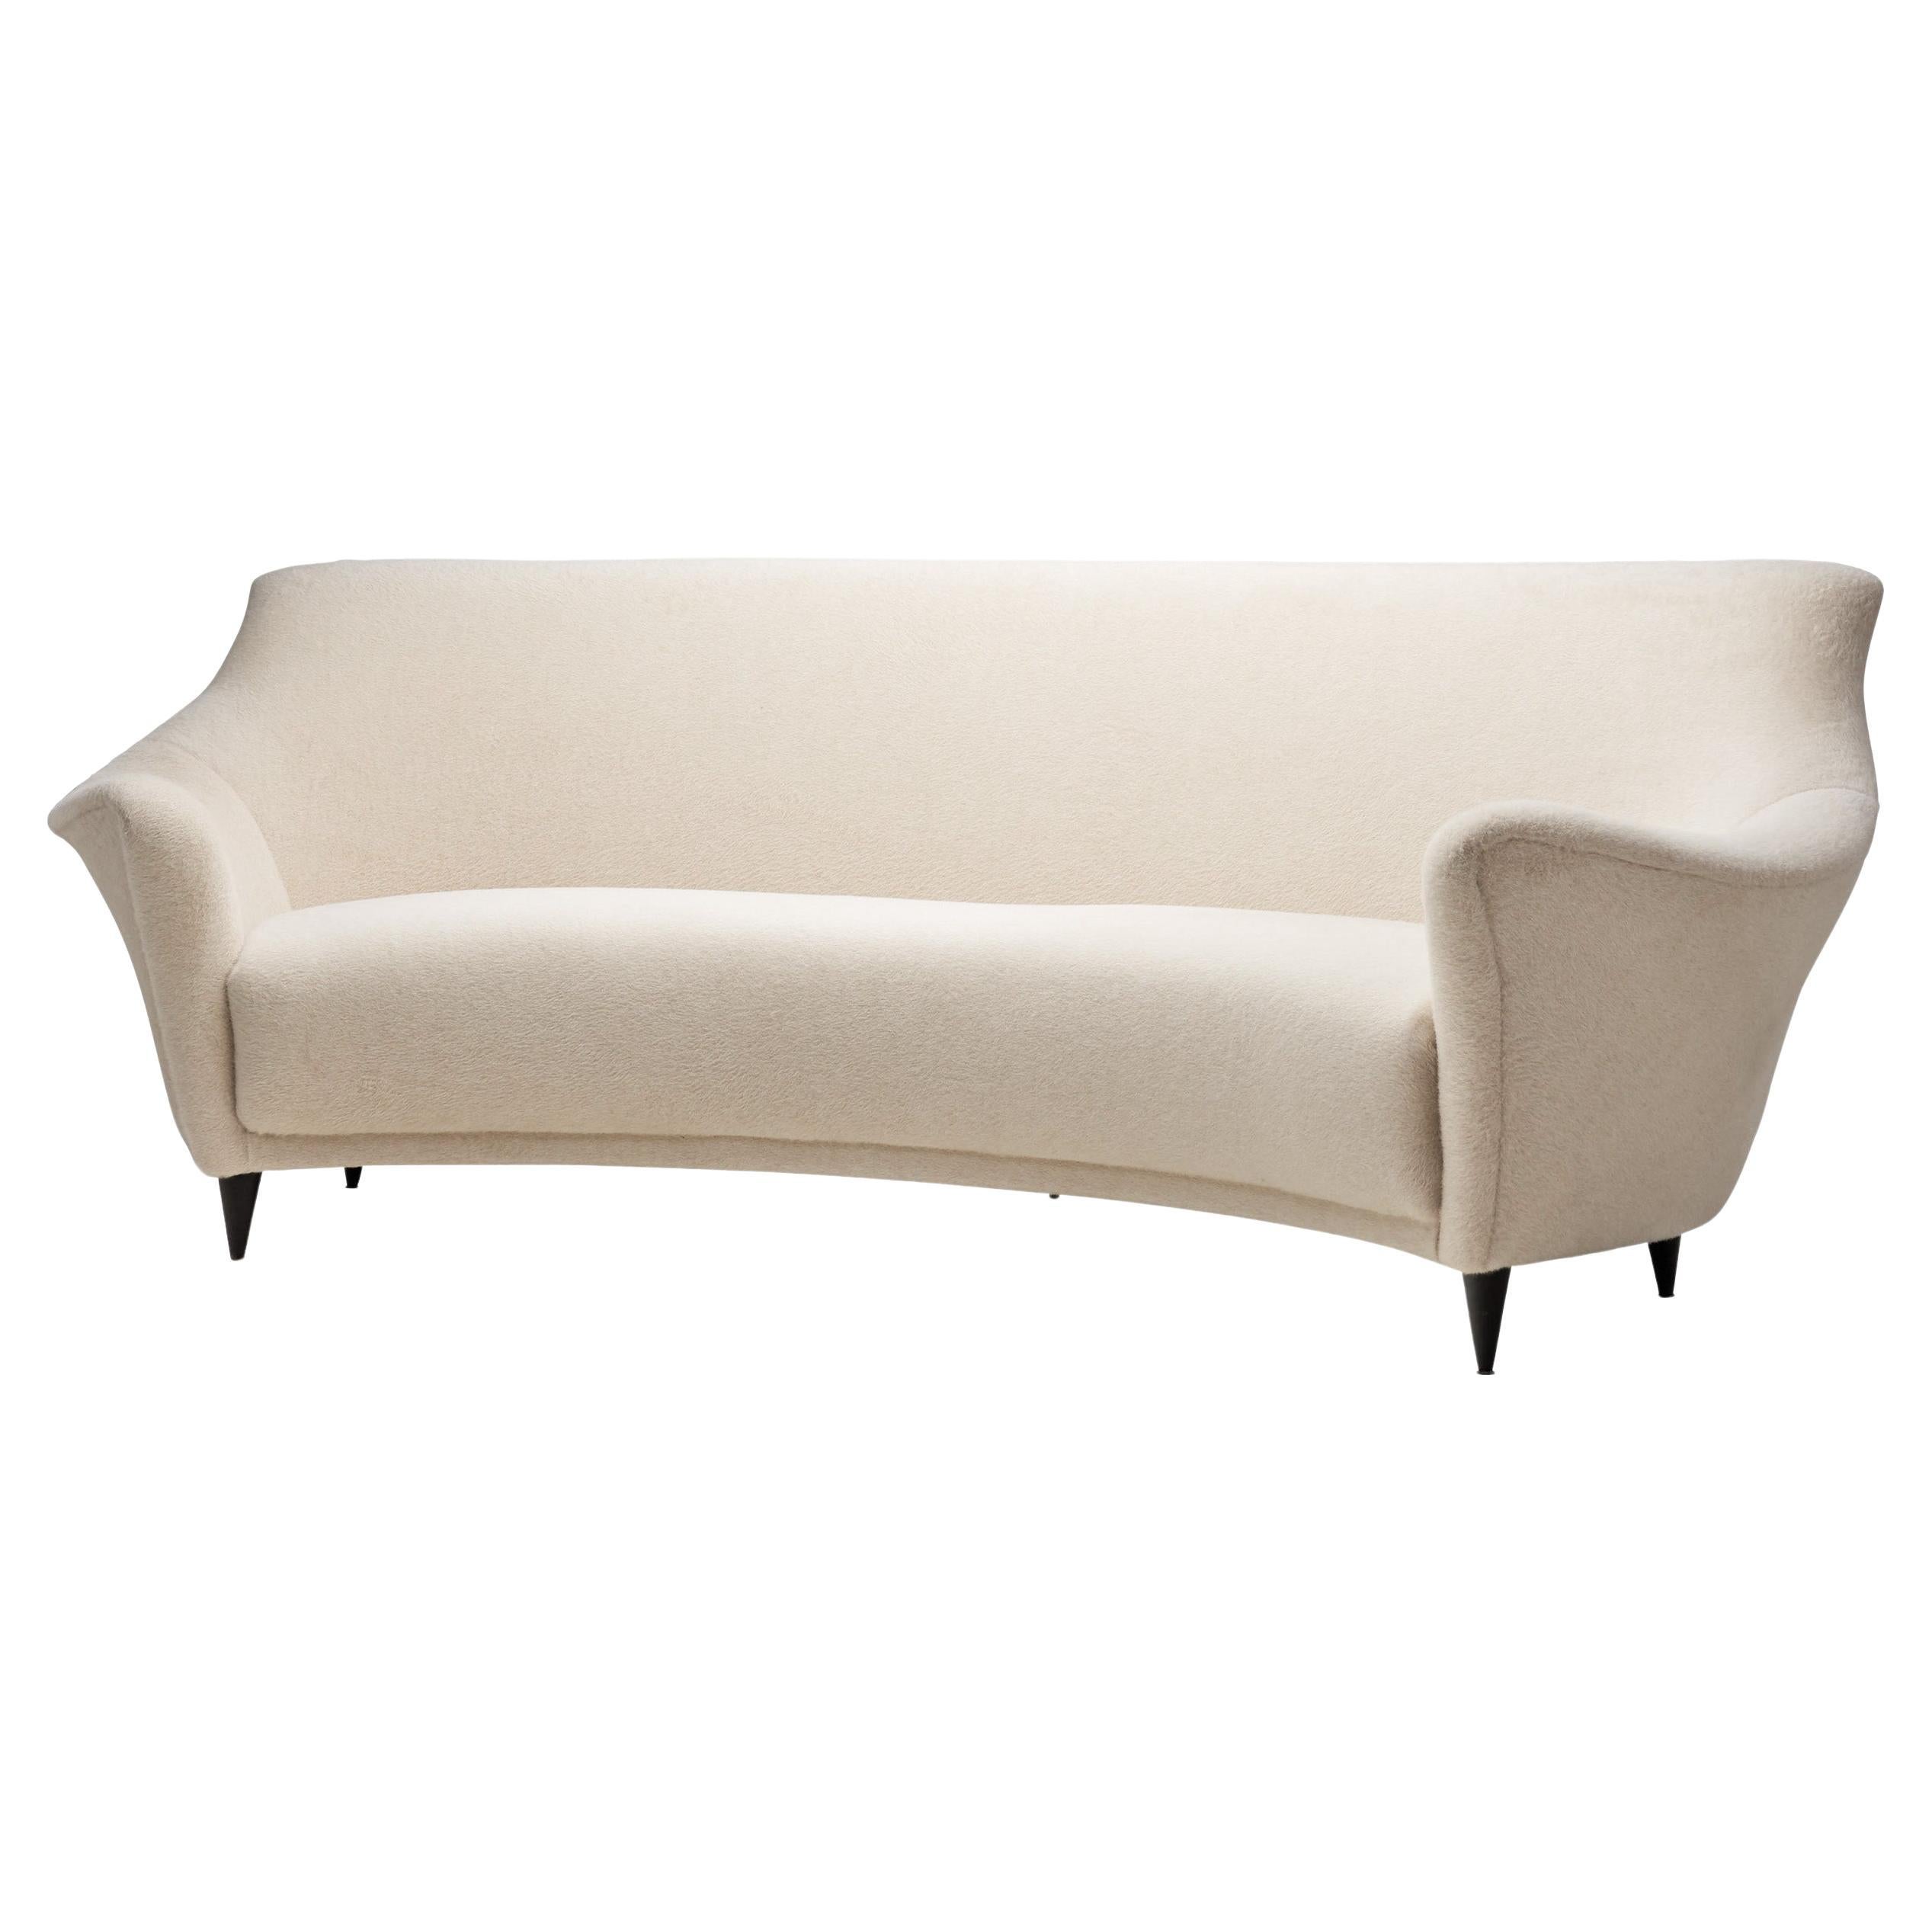 Upholstered Curved Cream Sofa by Ico Parisi (Attr.), Italy 1950s